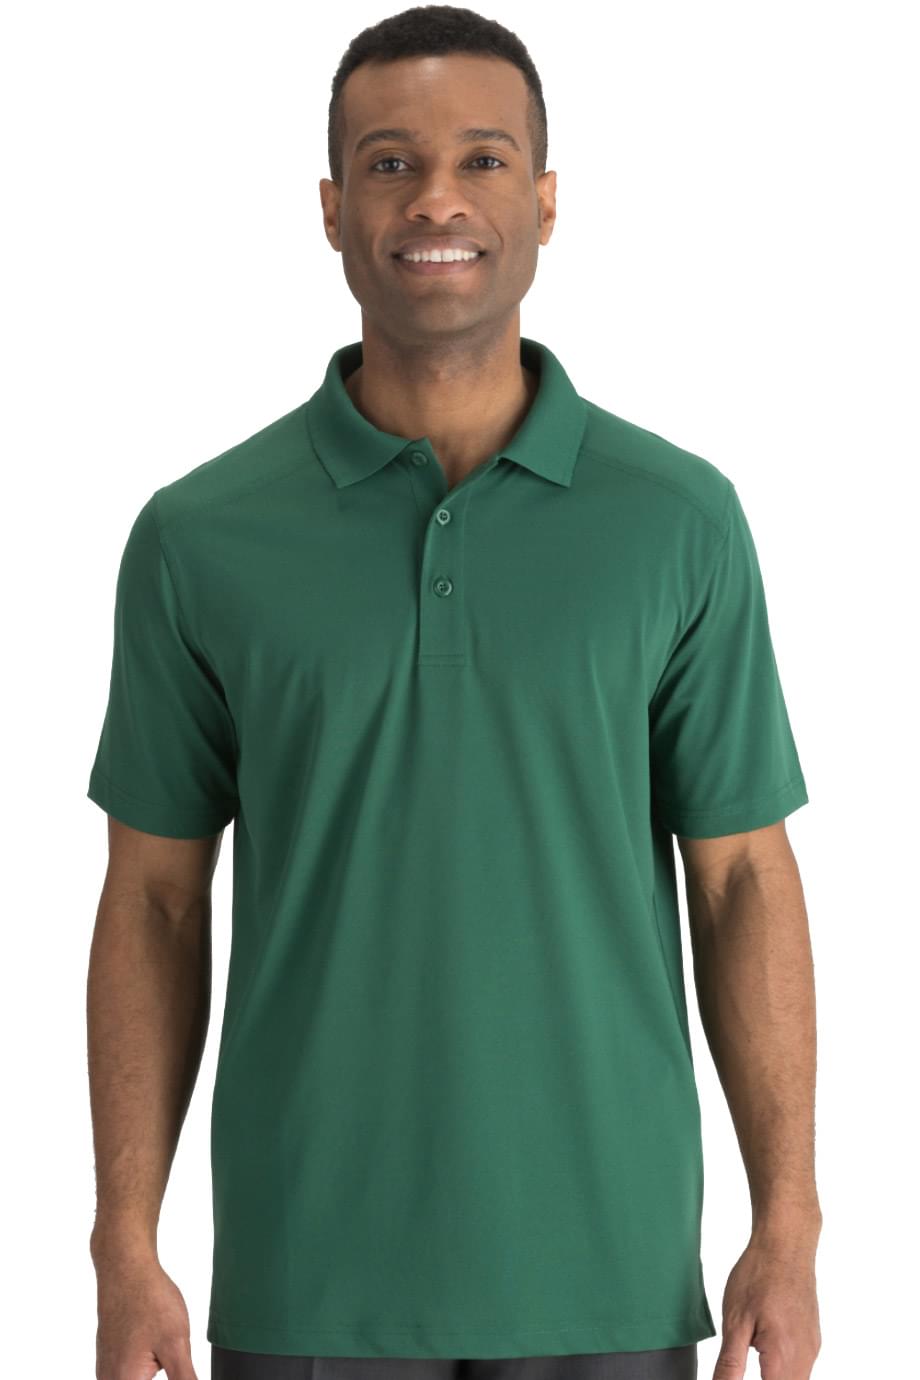 Uniforms - Sport Golf Polo Shirts, Polyester, Snag-proof